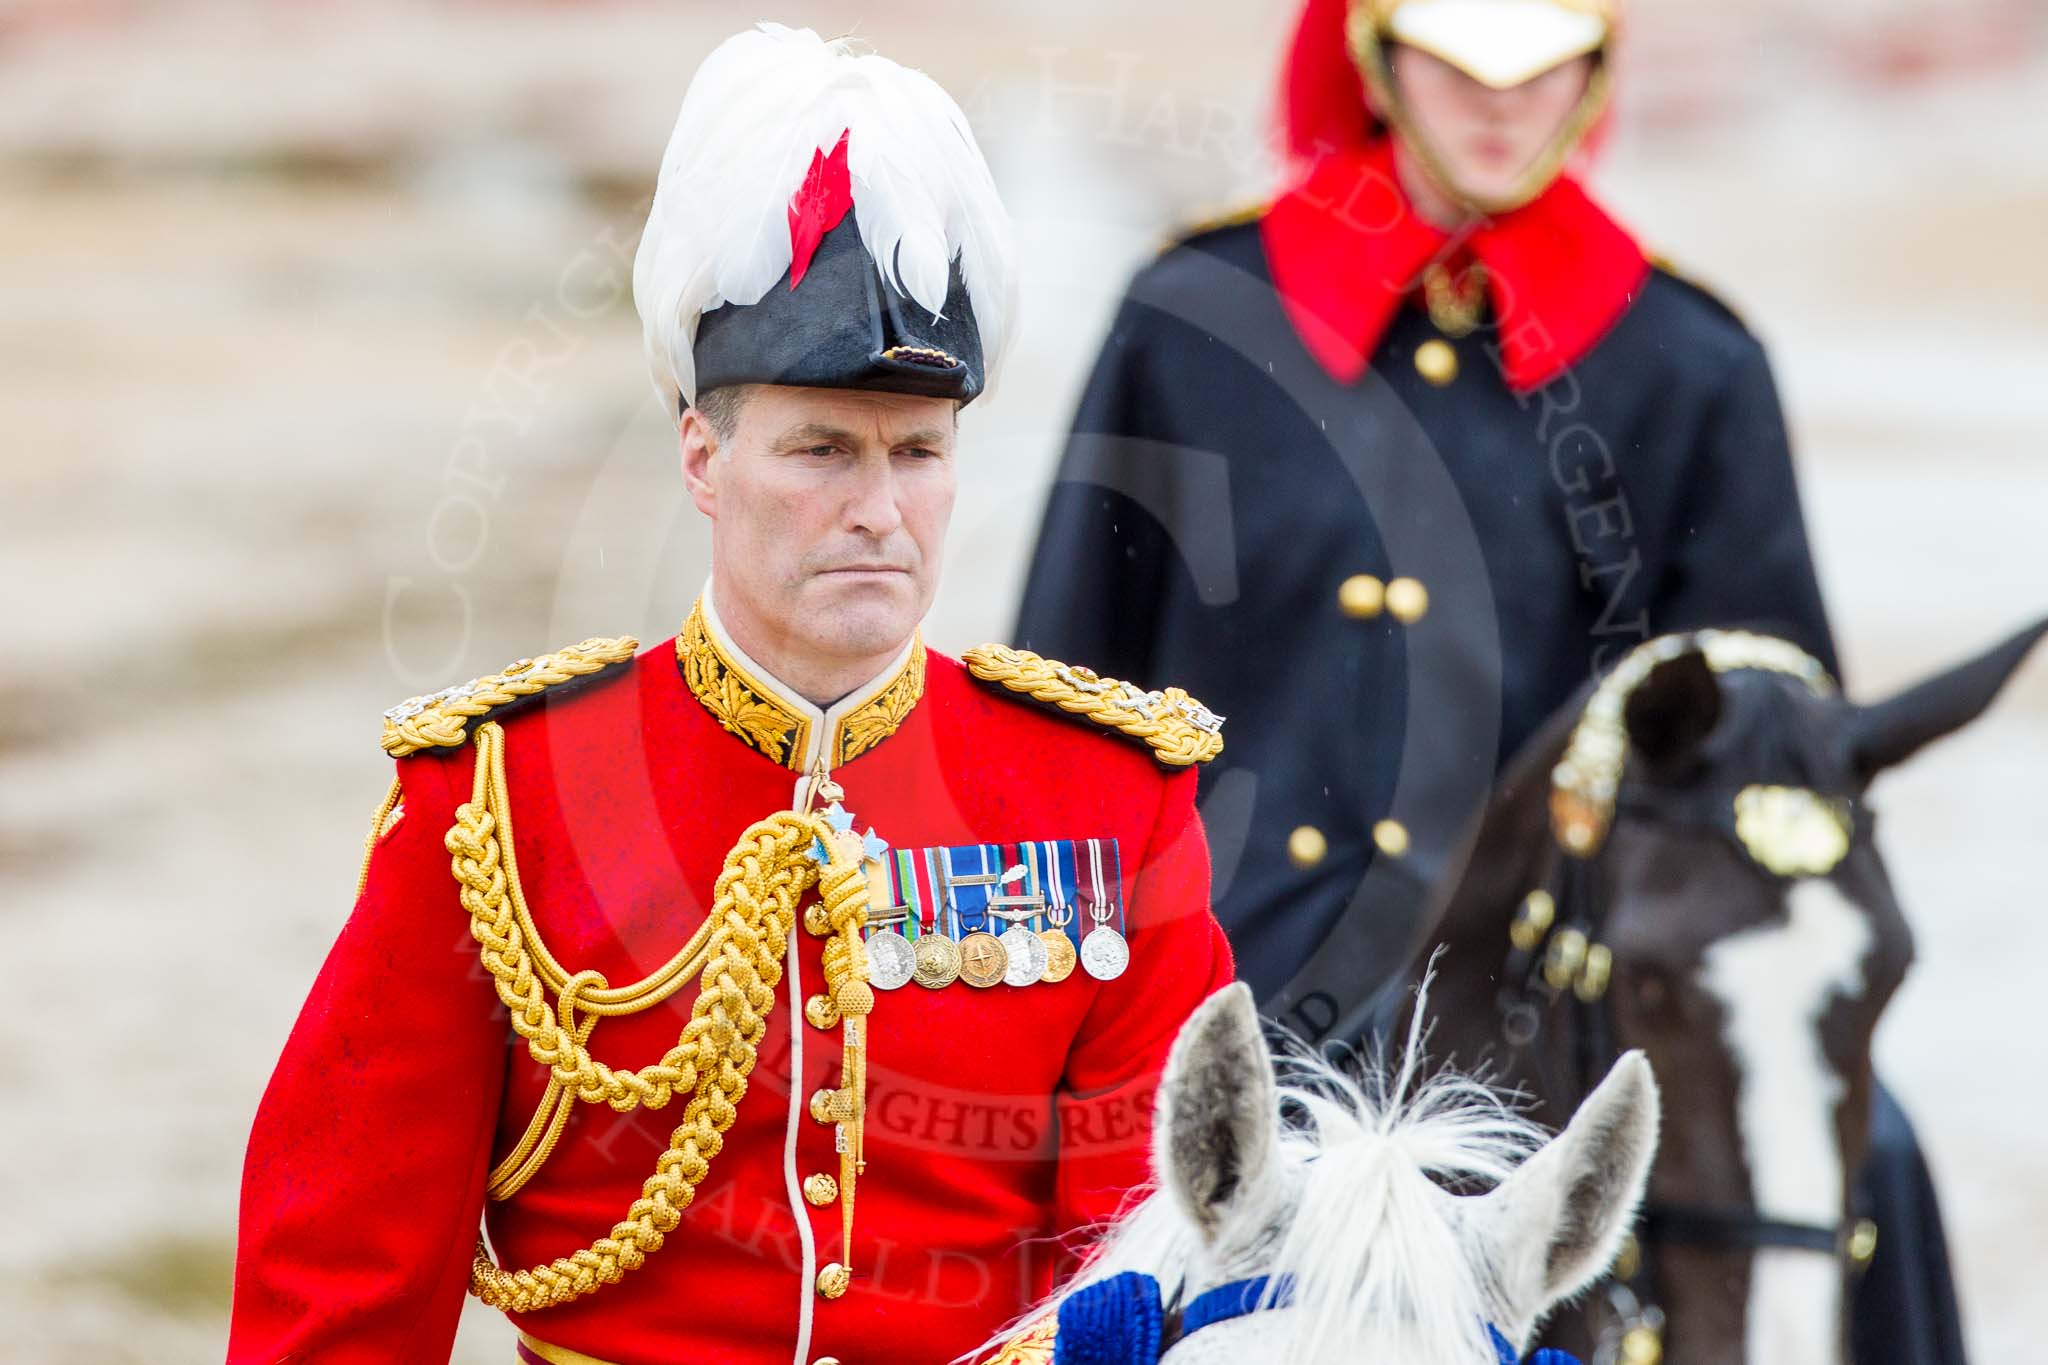 The Colonel's Review 2014.
Horse Guards Parade, Westminster,
London,

United Kingdom,
on 07 June 2014 at 11:06, image #311